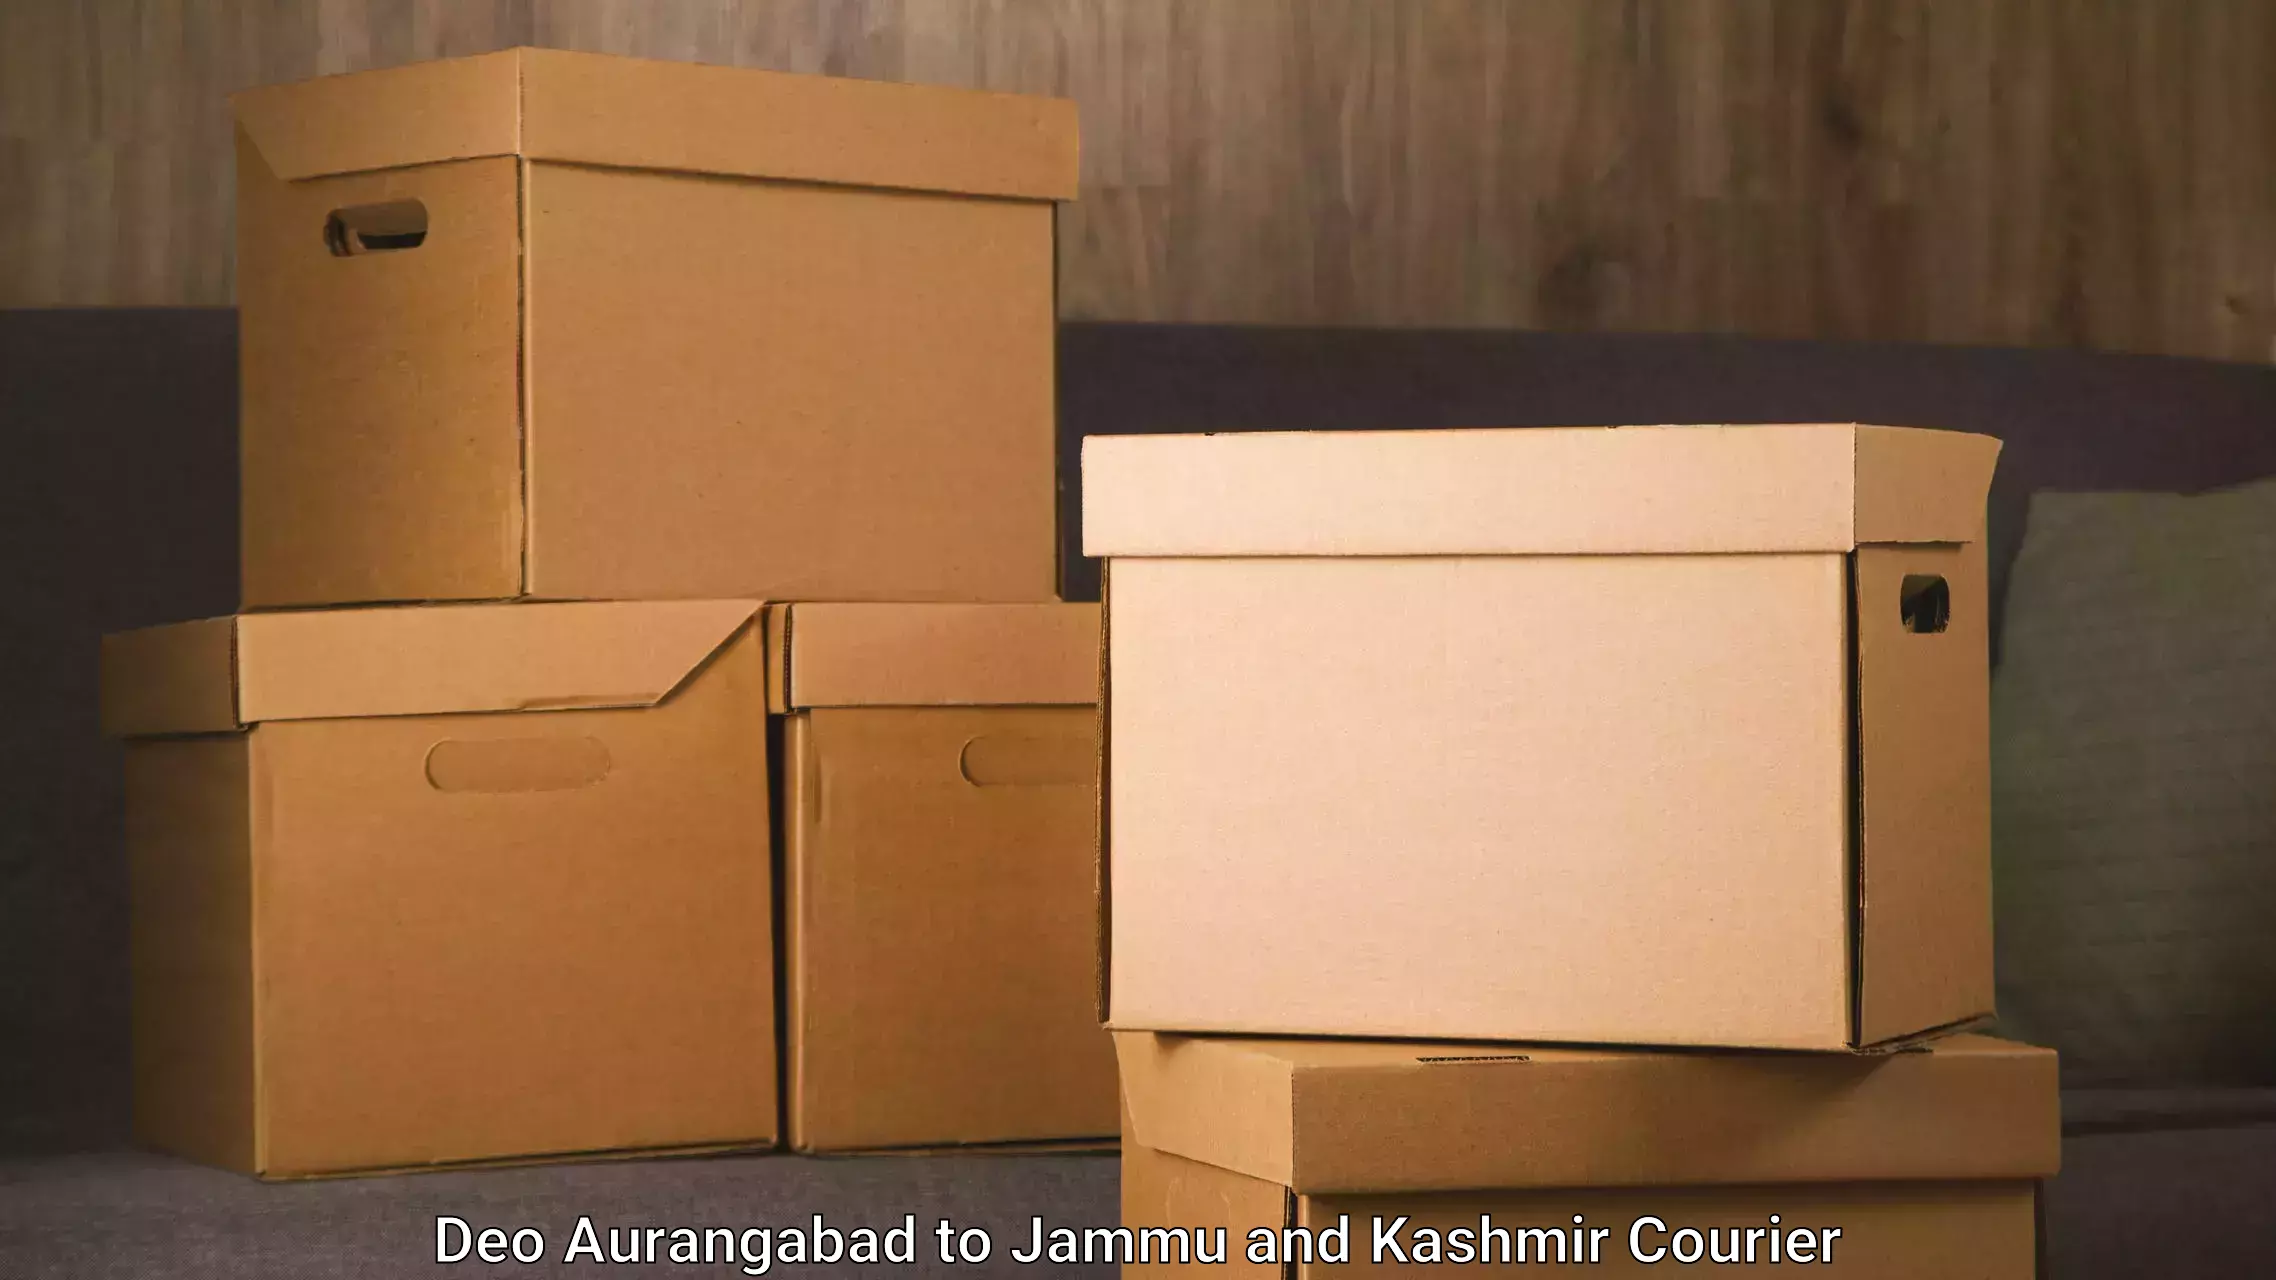 Quality relocation services Deo Aurangabad to Leh